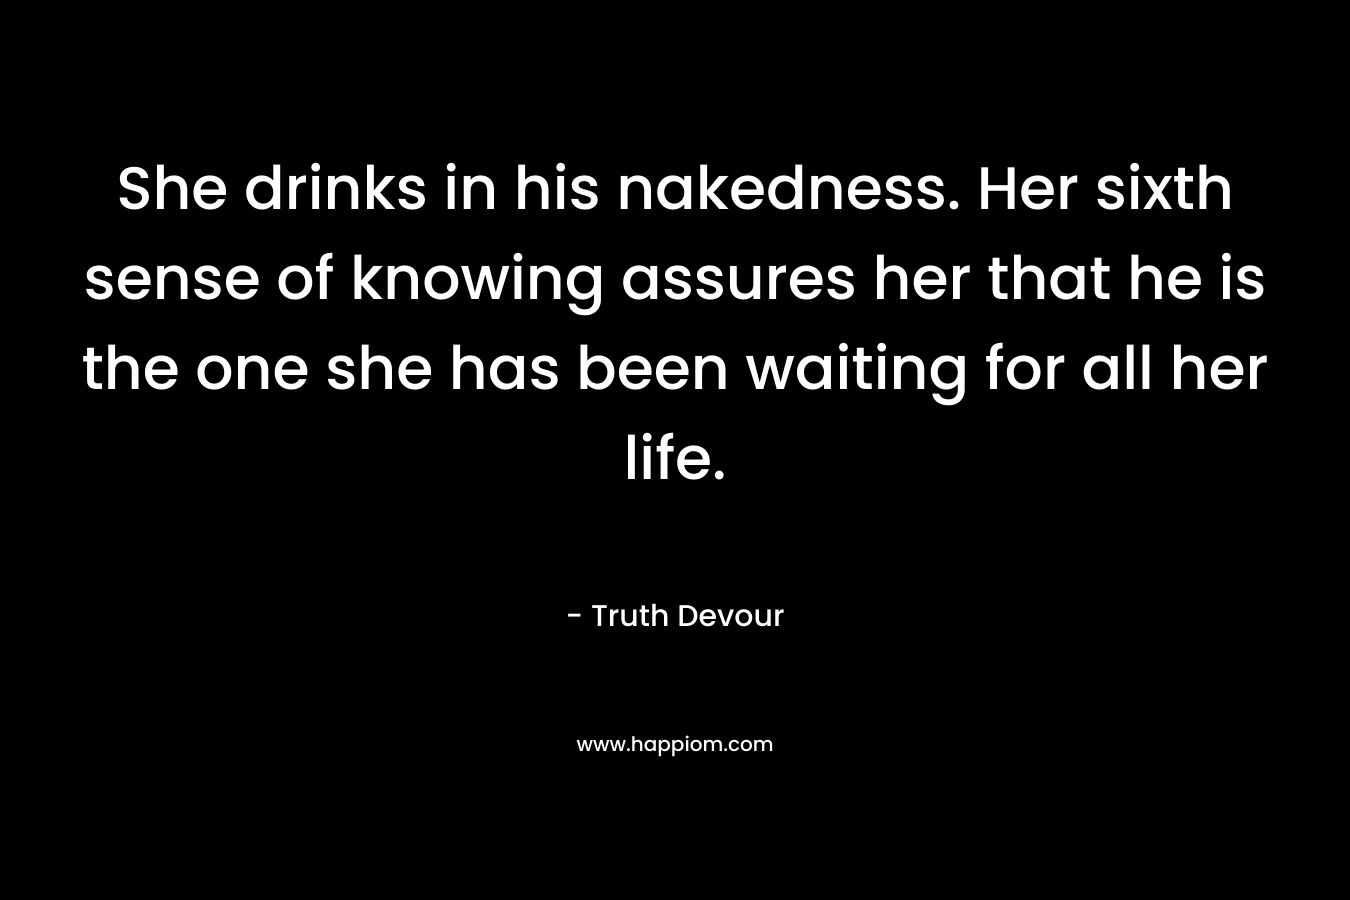 She drinks in his nakedness. Her sixth sense of knowing assures her that he is the one she has been waiting for all her life. – Truth Devour